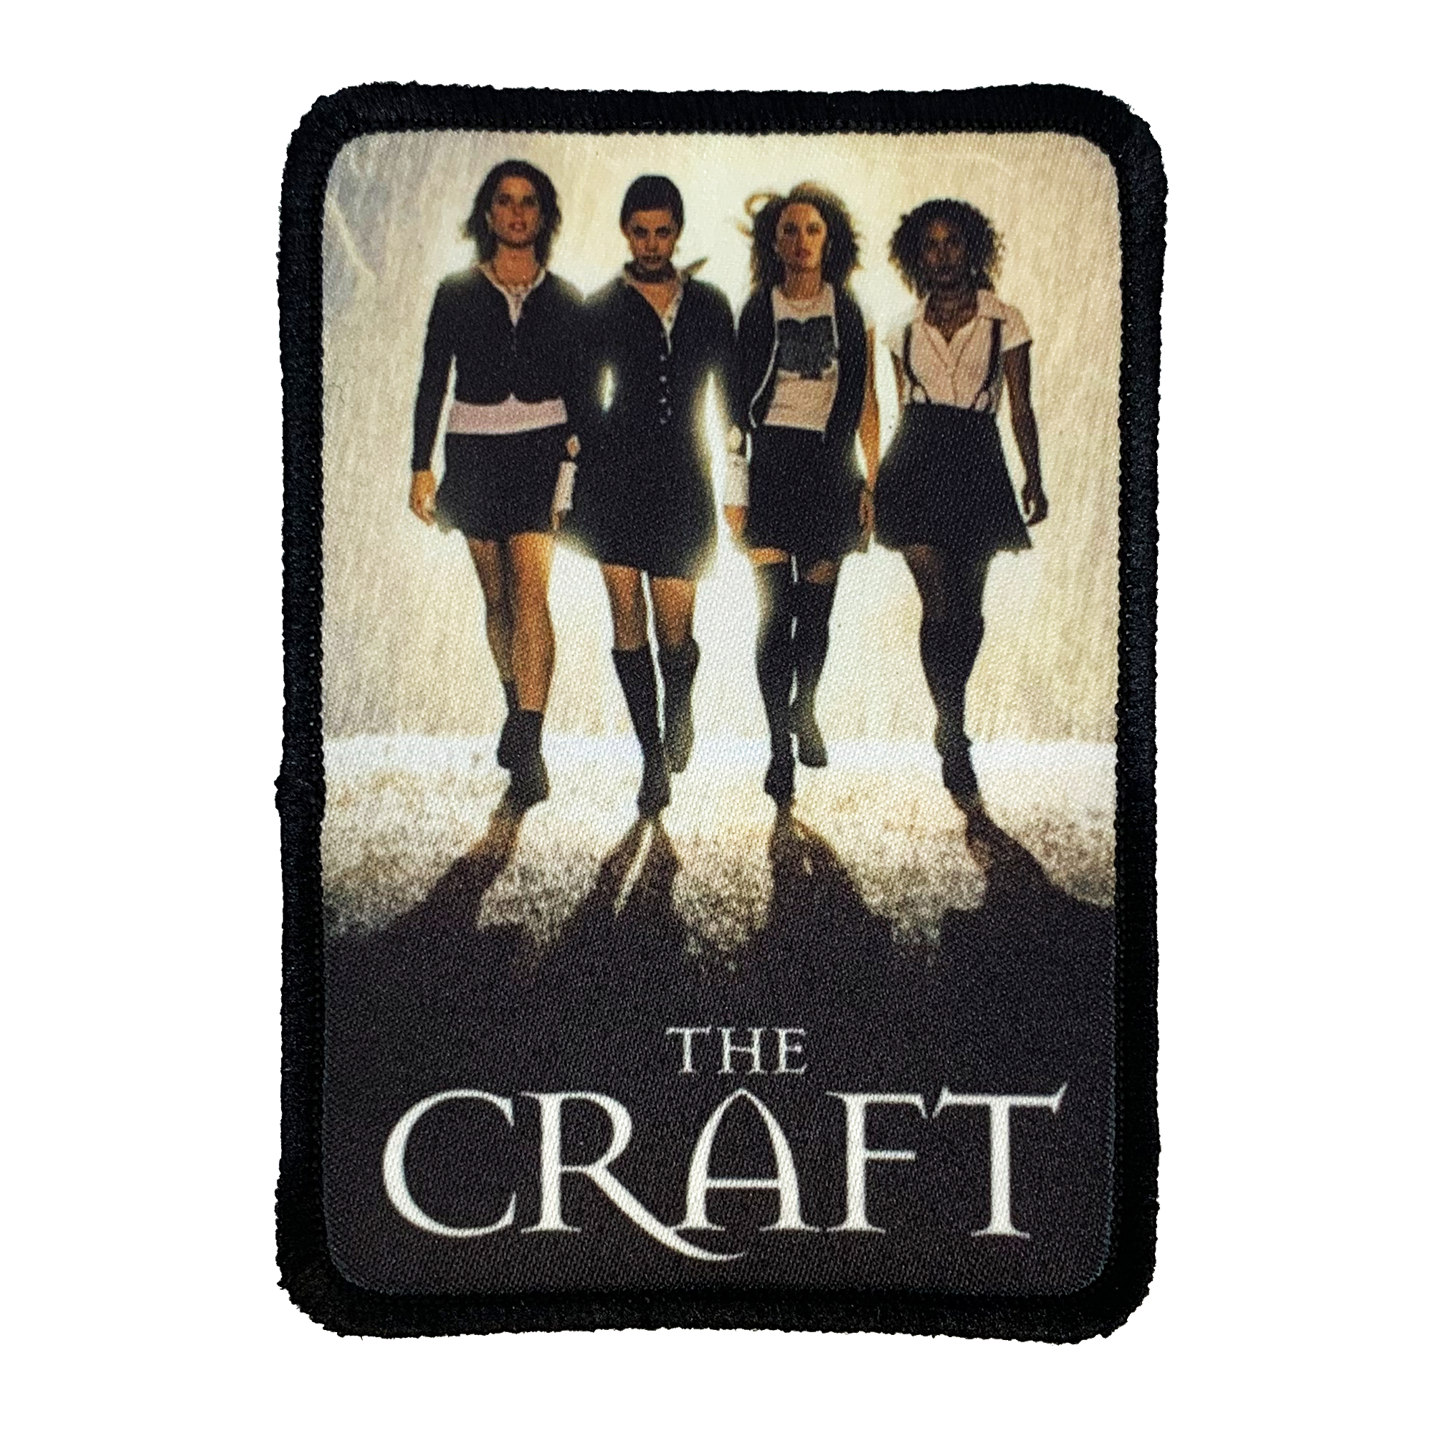 The Craft Iron-On Patch - UNMASKED Horror & Punk Patches and Decor